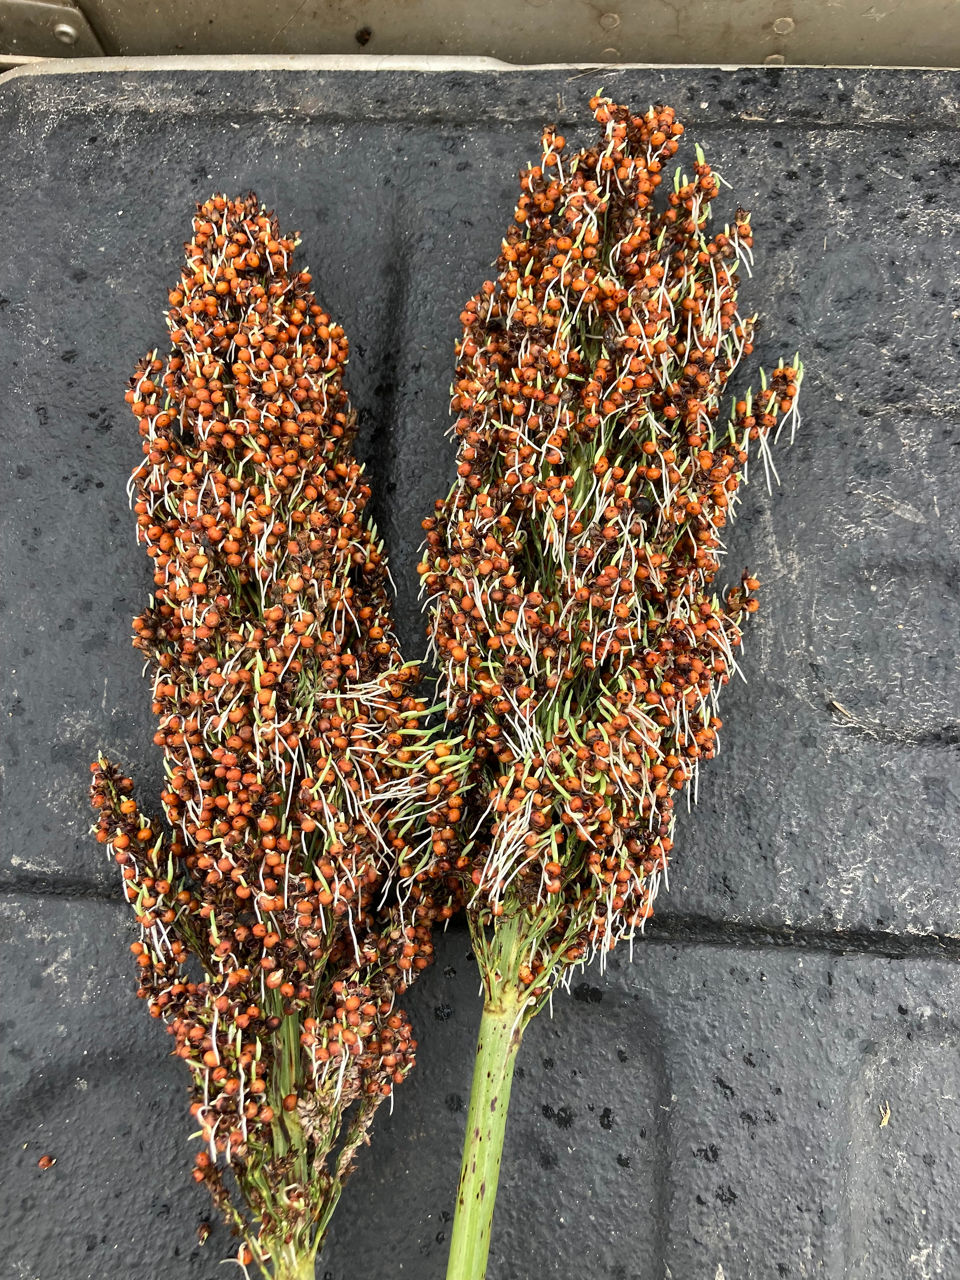 Pre-harvest sprouting of grain sorghum, note the white radicles and green coleoptiles